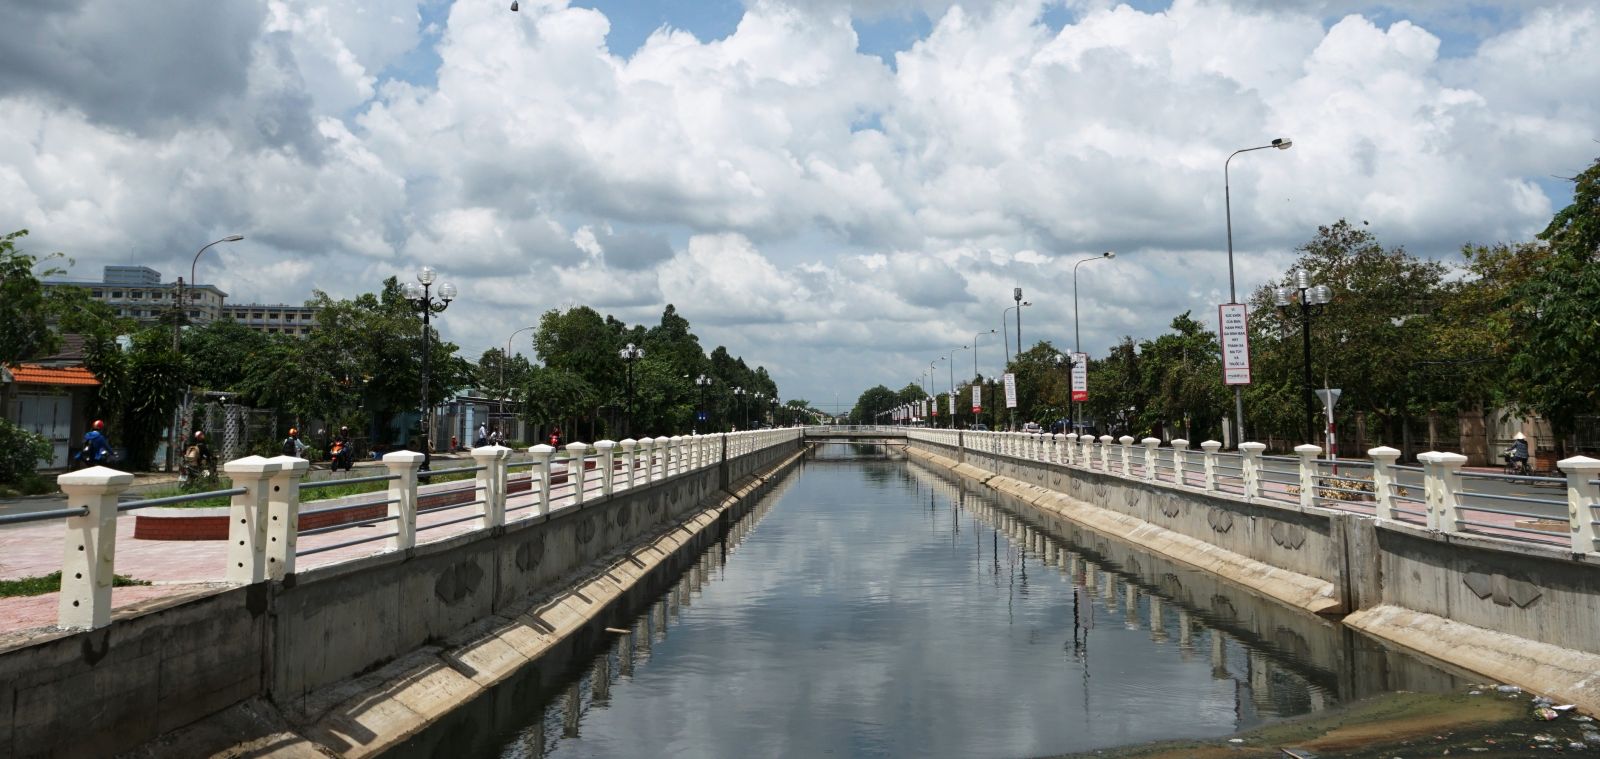 The city focuses on mobilizing all resources for constructing and developing Tan An city, including the construction of the city’s key works (Photo: Revolving canal embankment to be completed)